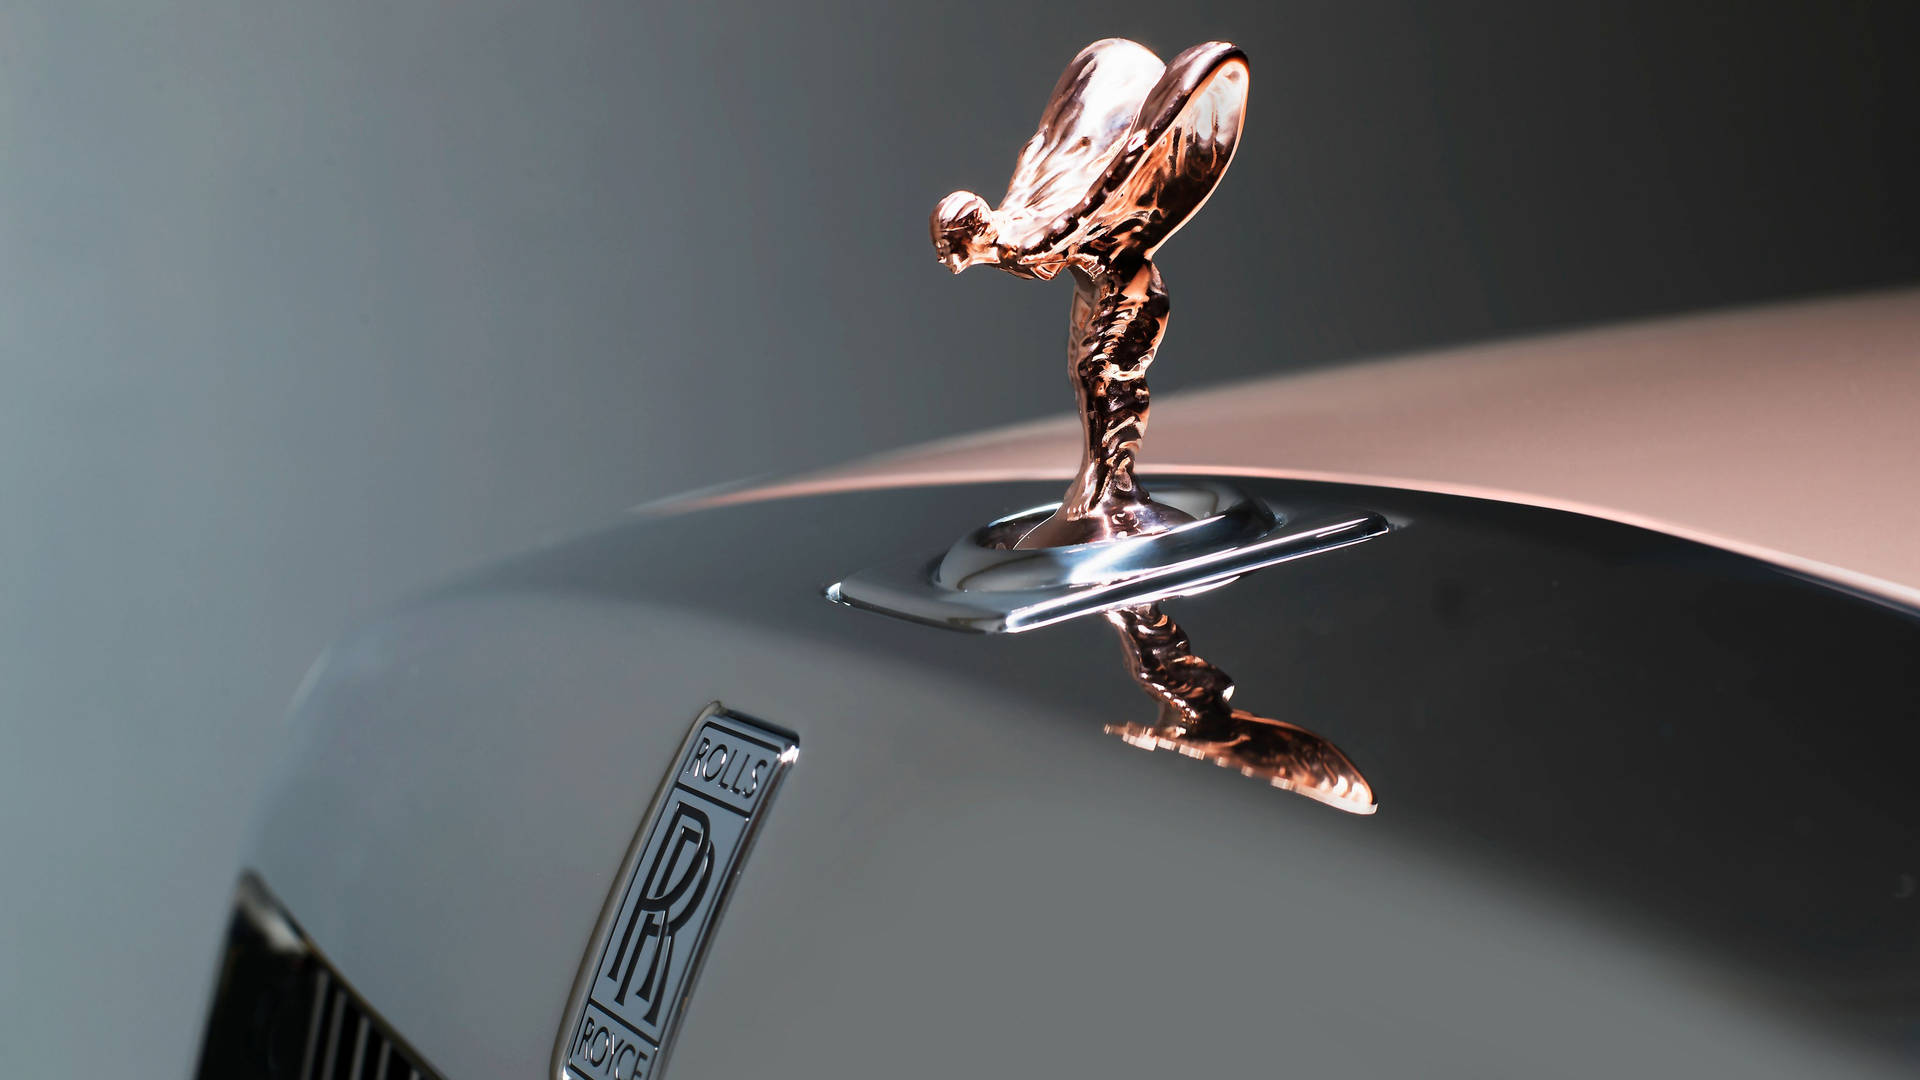 Rolls Royce 4096X2304 Wallpaper and Background Image